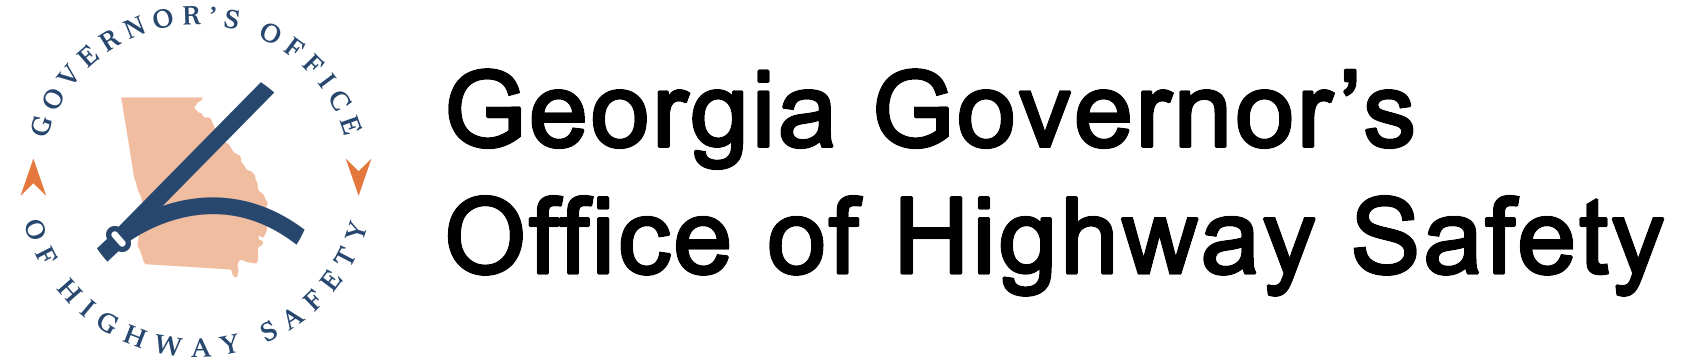 GOVERNORS OFFICE OF HIGHWAY SAFETY IN GEORGIA